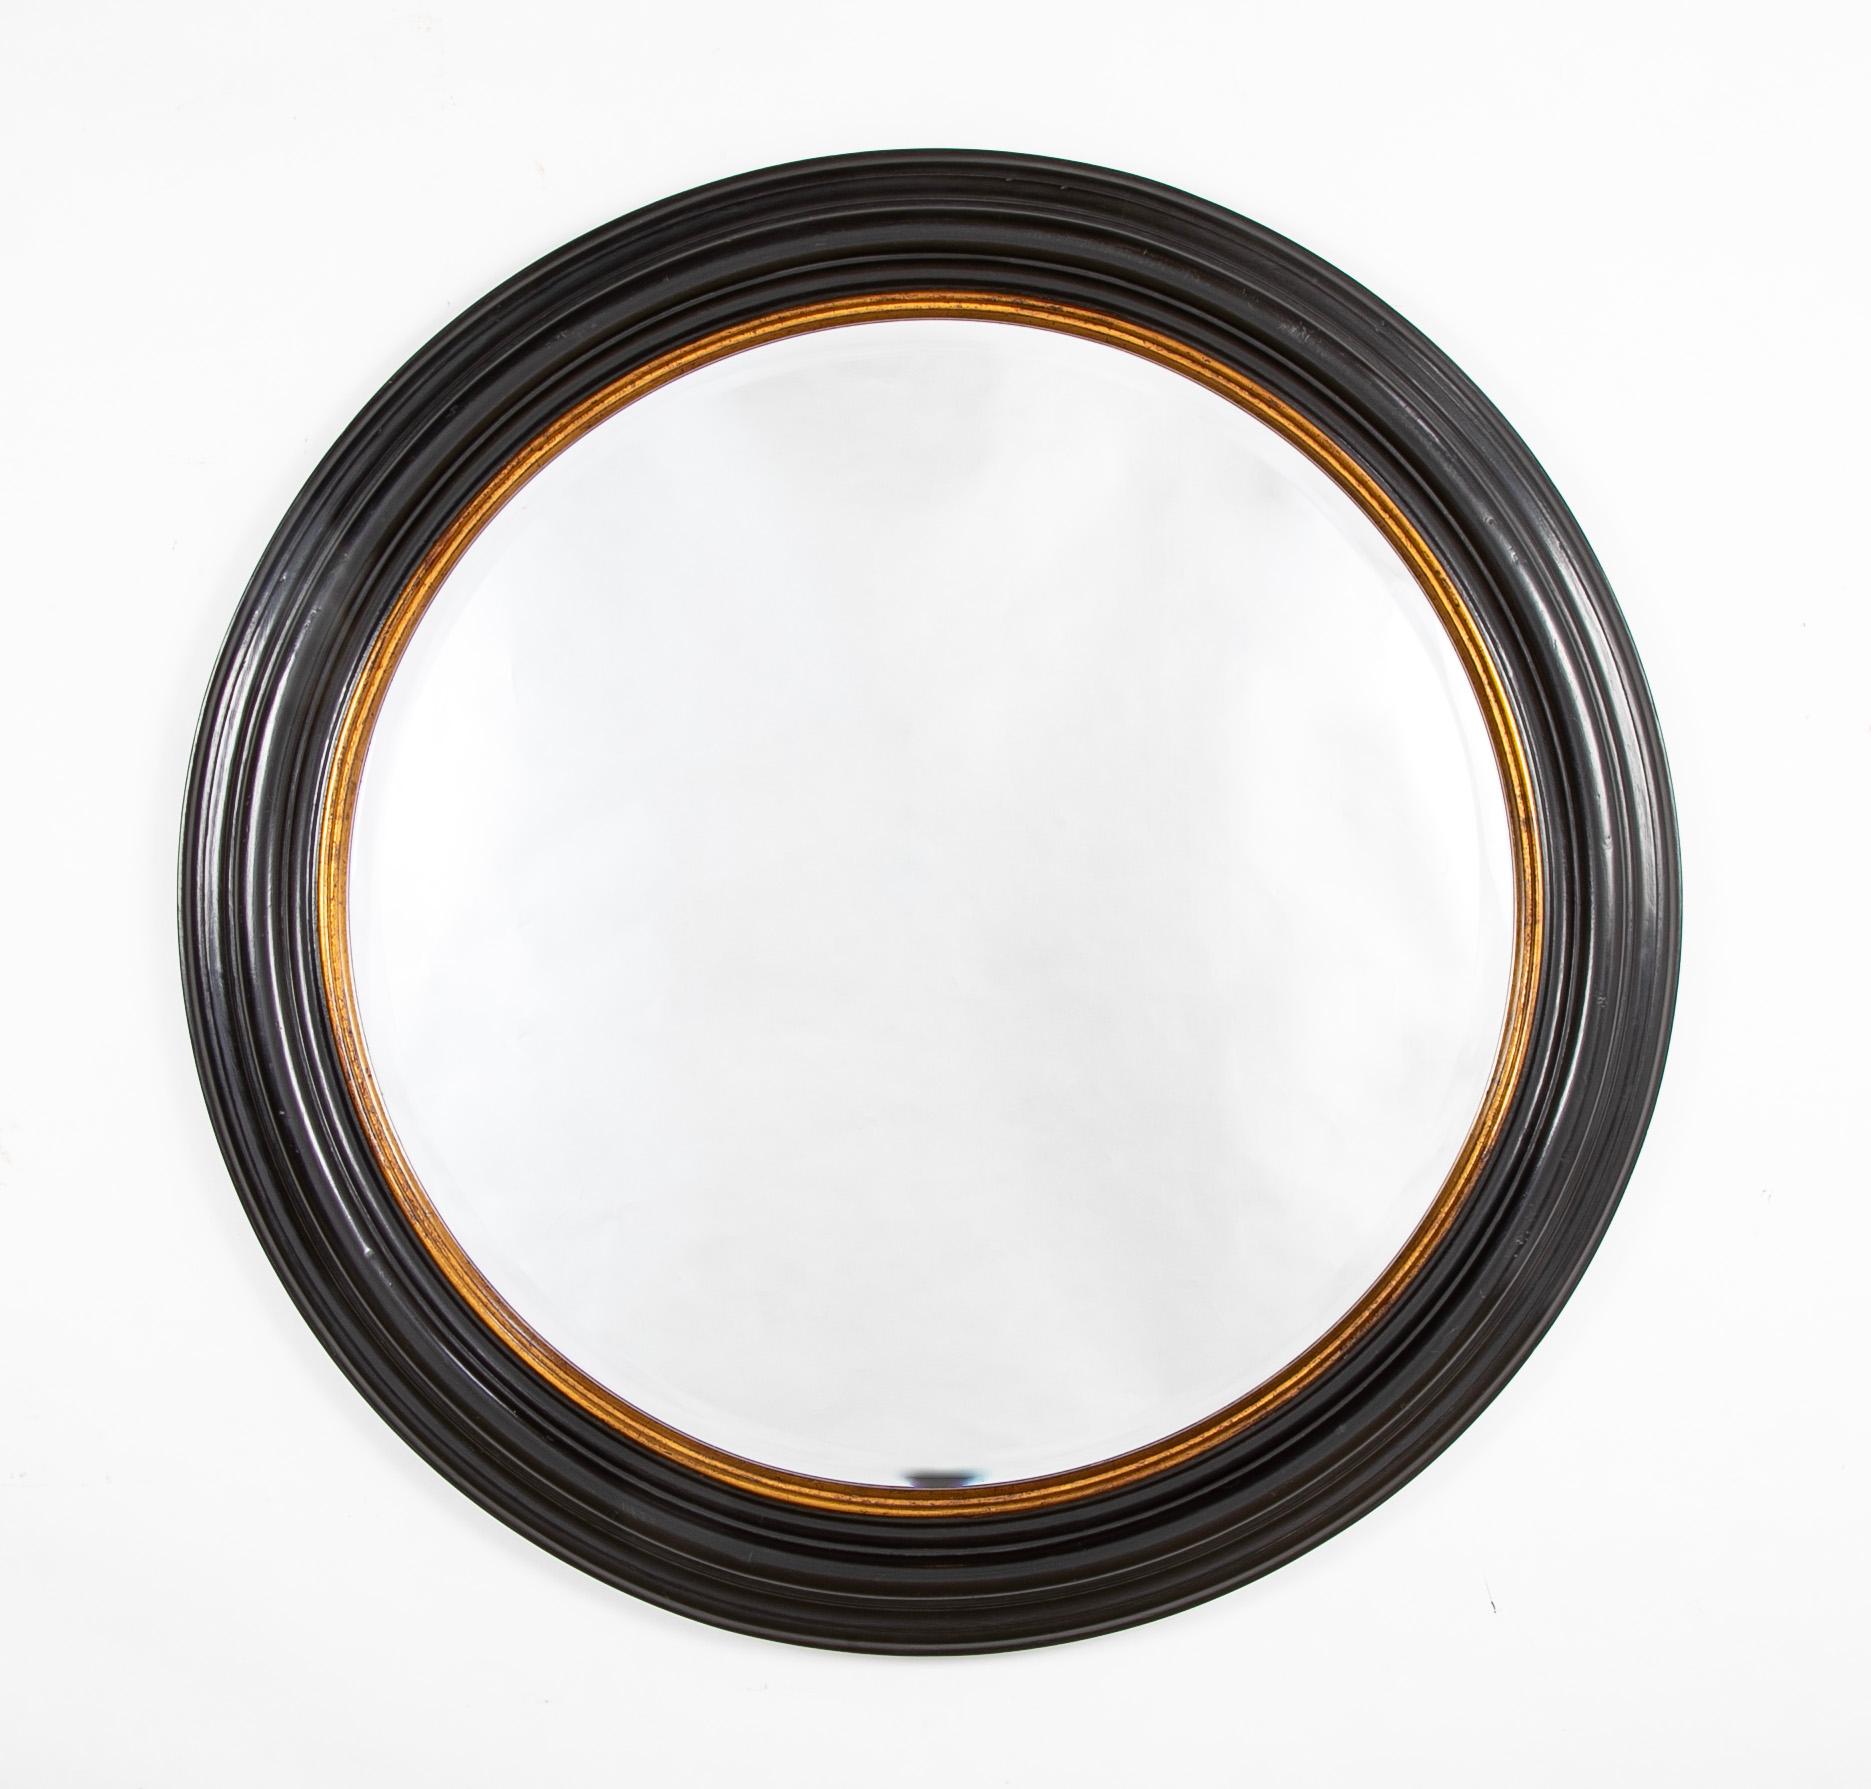 English Regency Black Lacquer And Gilt Round Mirror With Beveled Glass, Large Scale For Sale